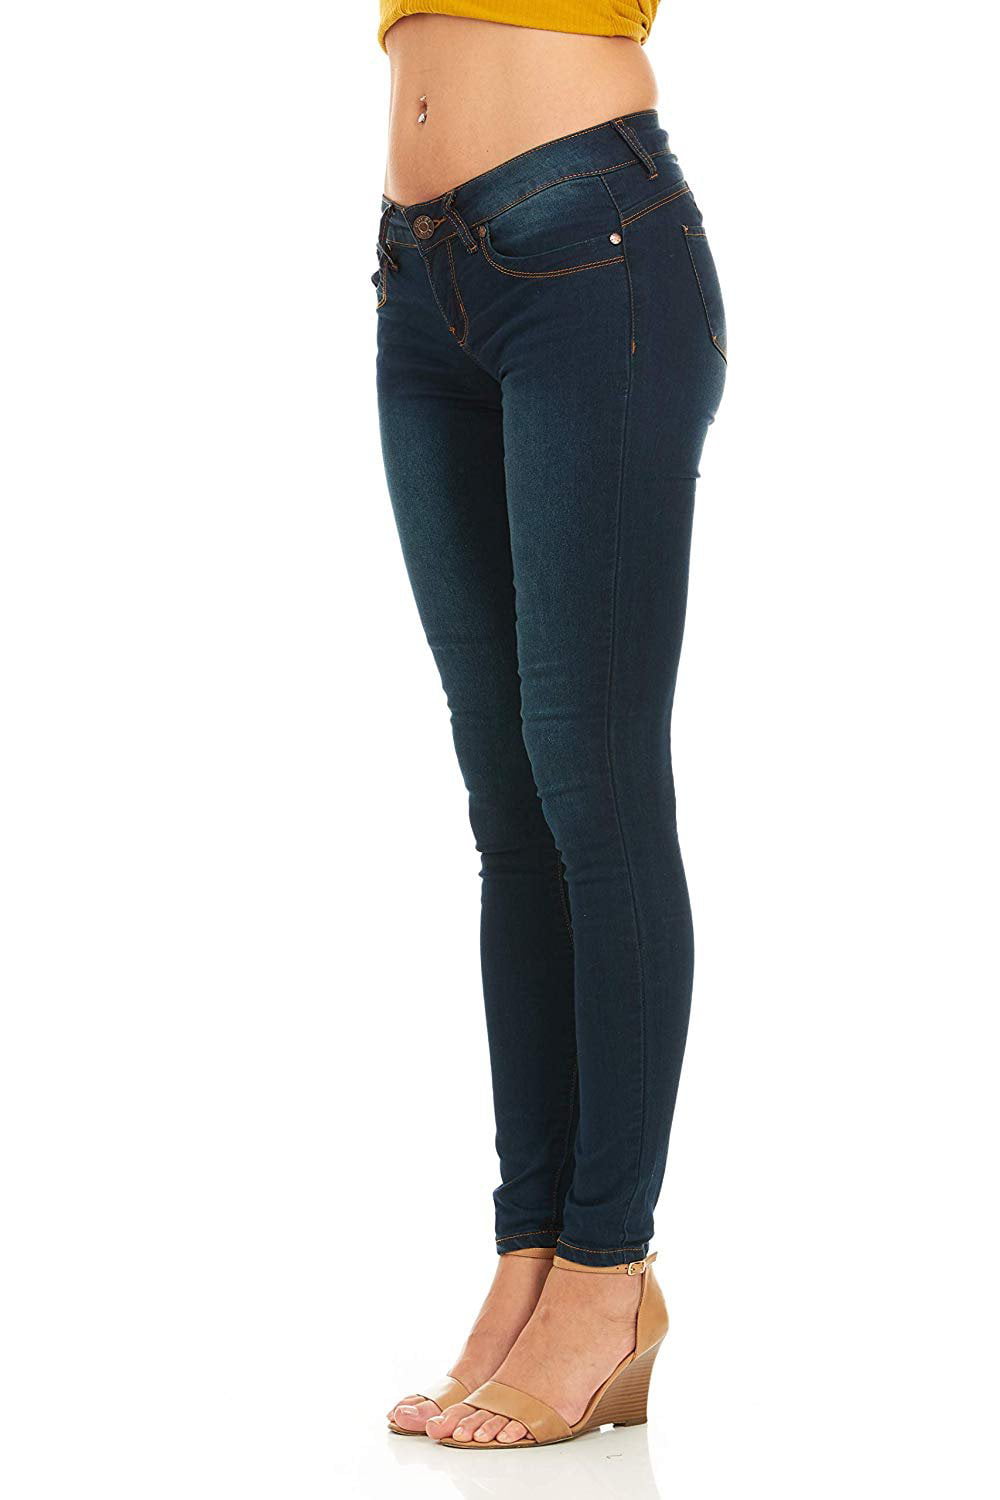 Buy Light Blue Jeans & Jeggings for Women by FASHION CULT Online | Ajio.com